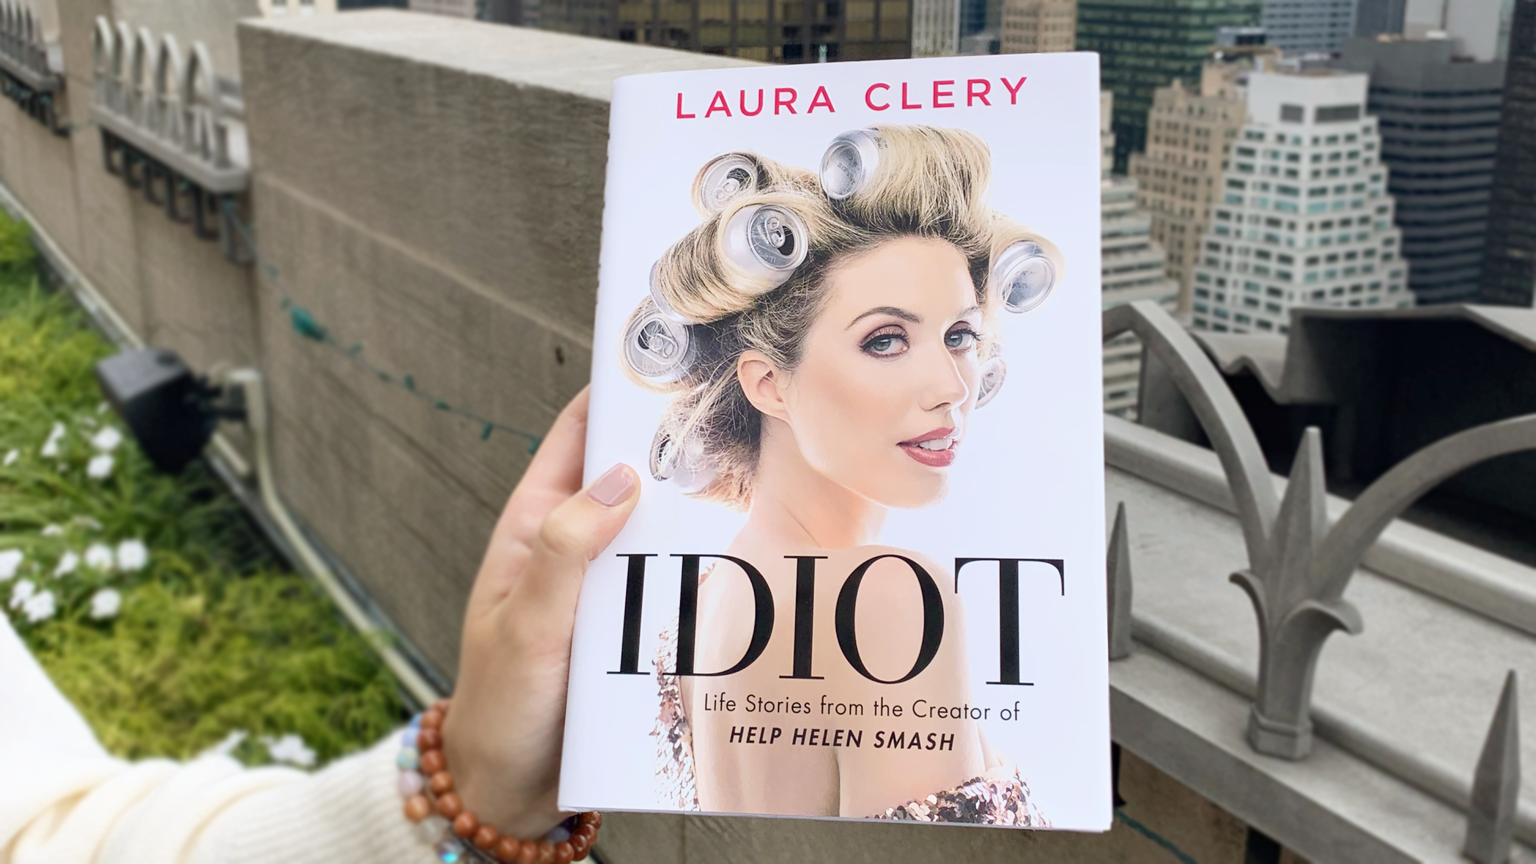 Laura Clery's book titled Idiot